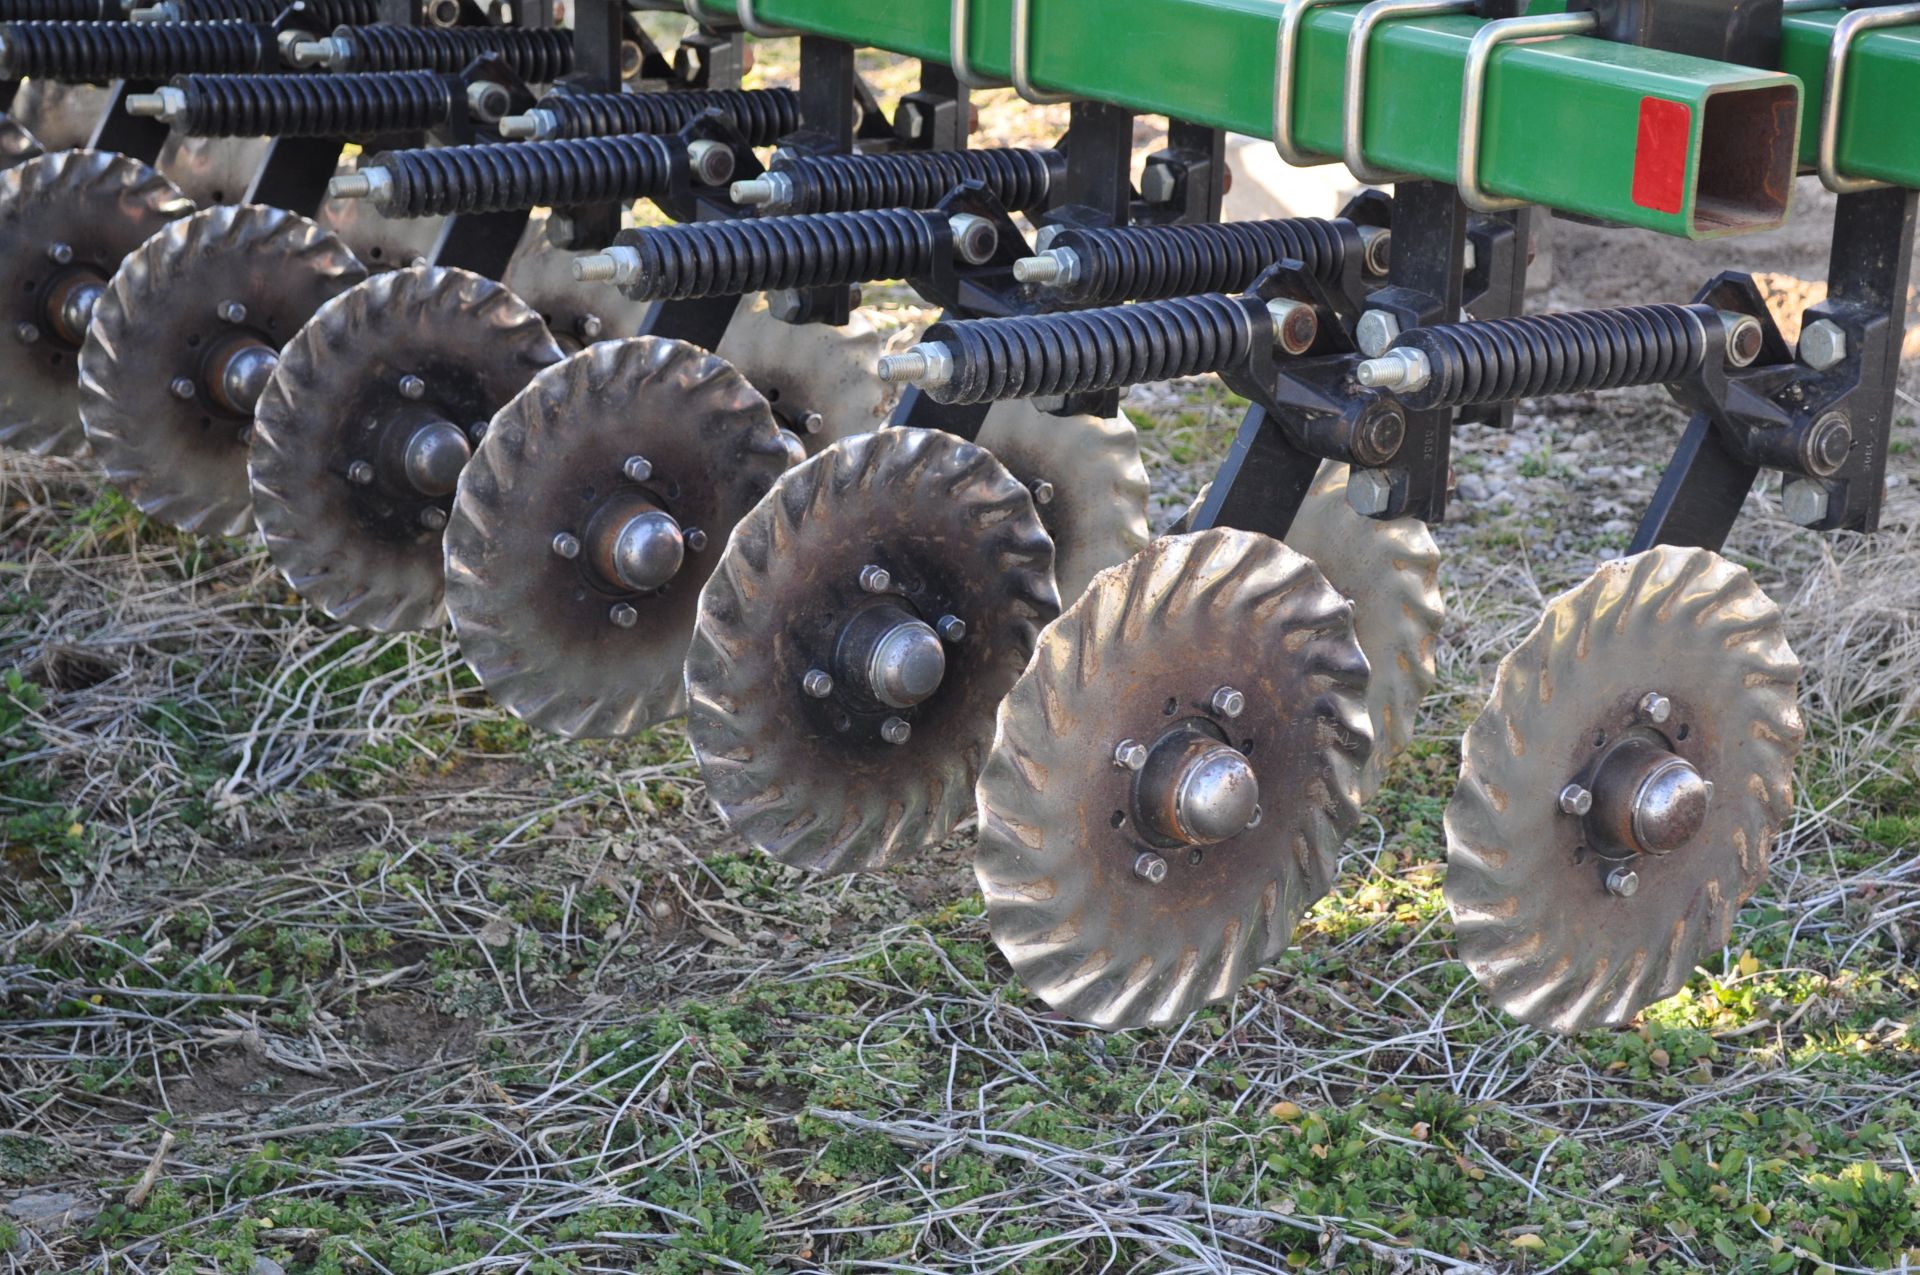 15’ Great Plains 1500 grain drill, 7.5” spacing, no till coulters, ground drive, one owner - Image 14 of 15